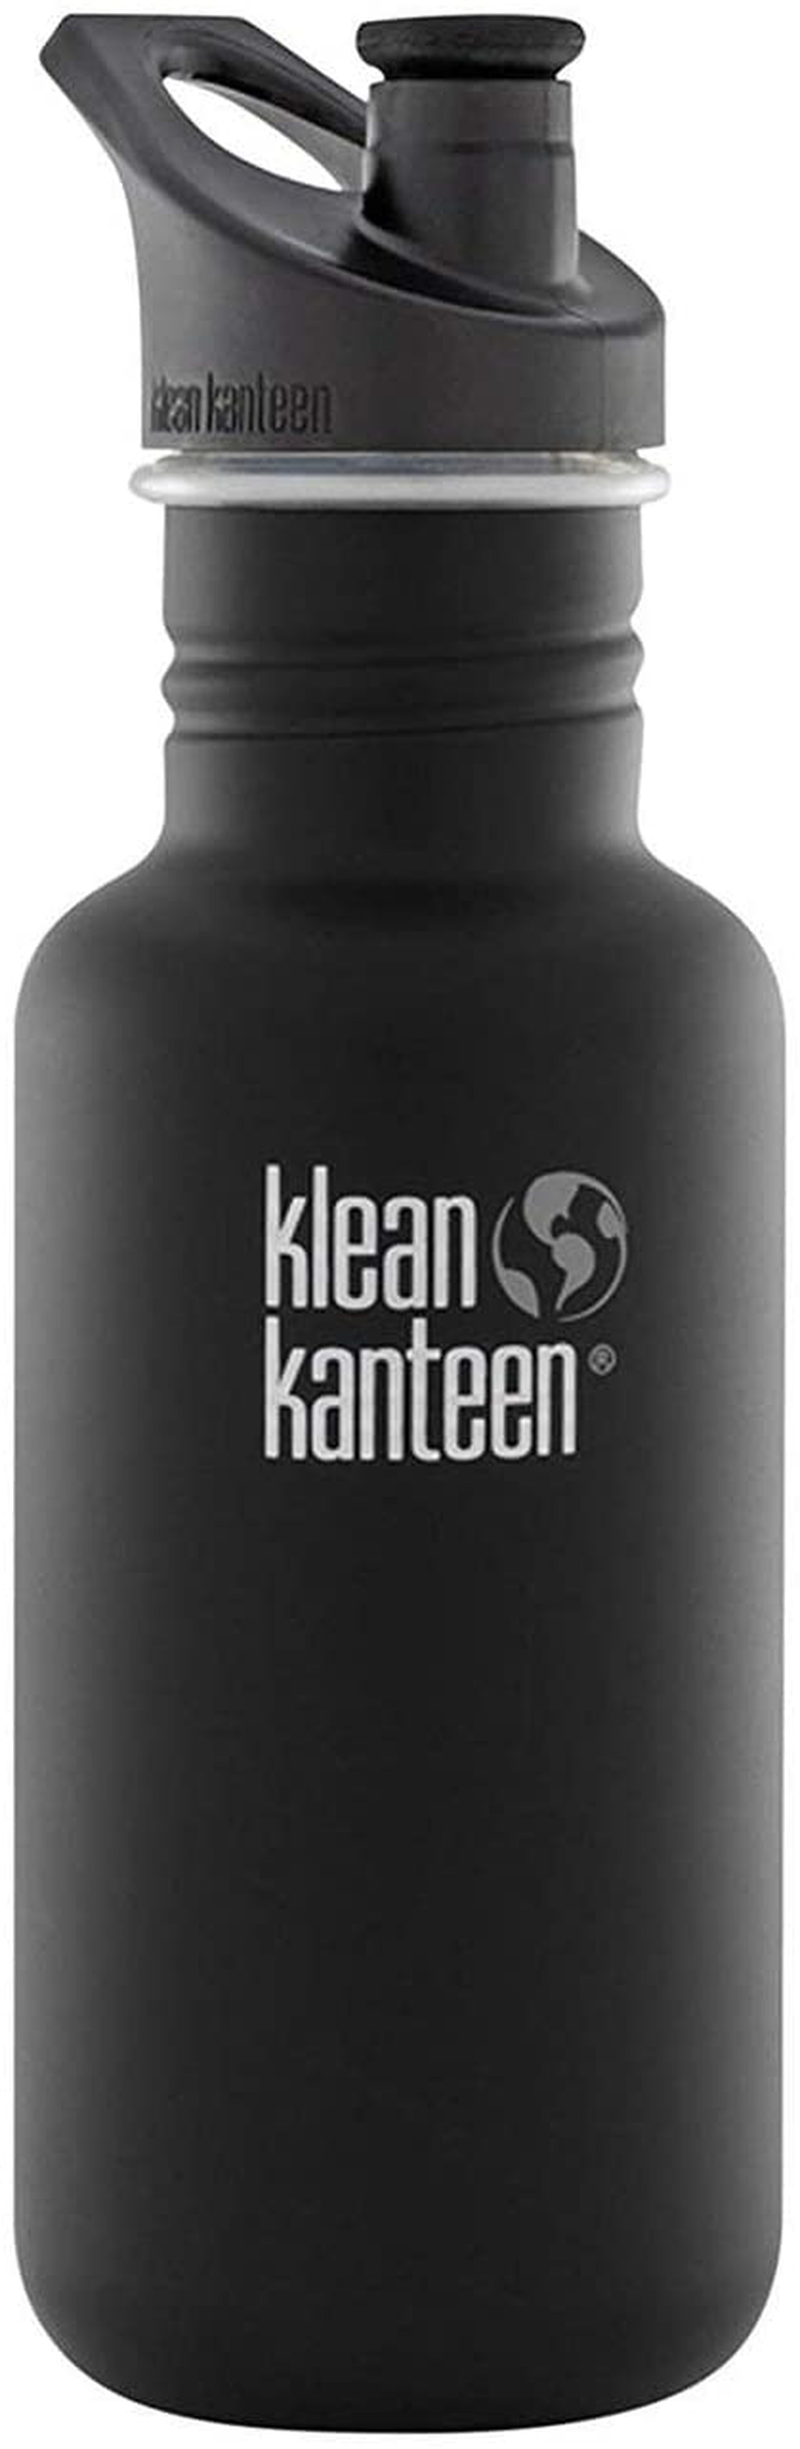 Klean Kanteen Classic Stainless Steel Singel Wall Non-Insulated Water Bottle with Sport Cap